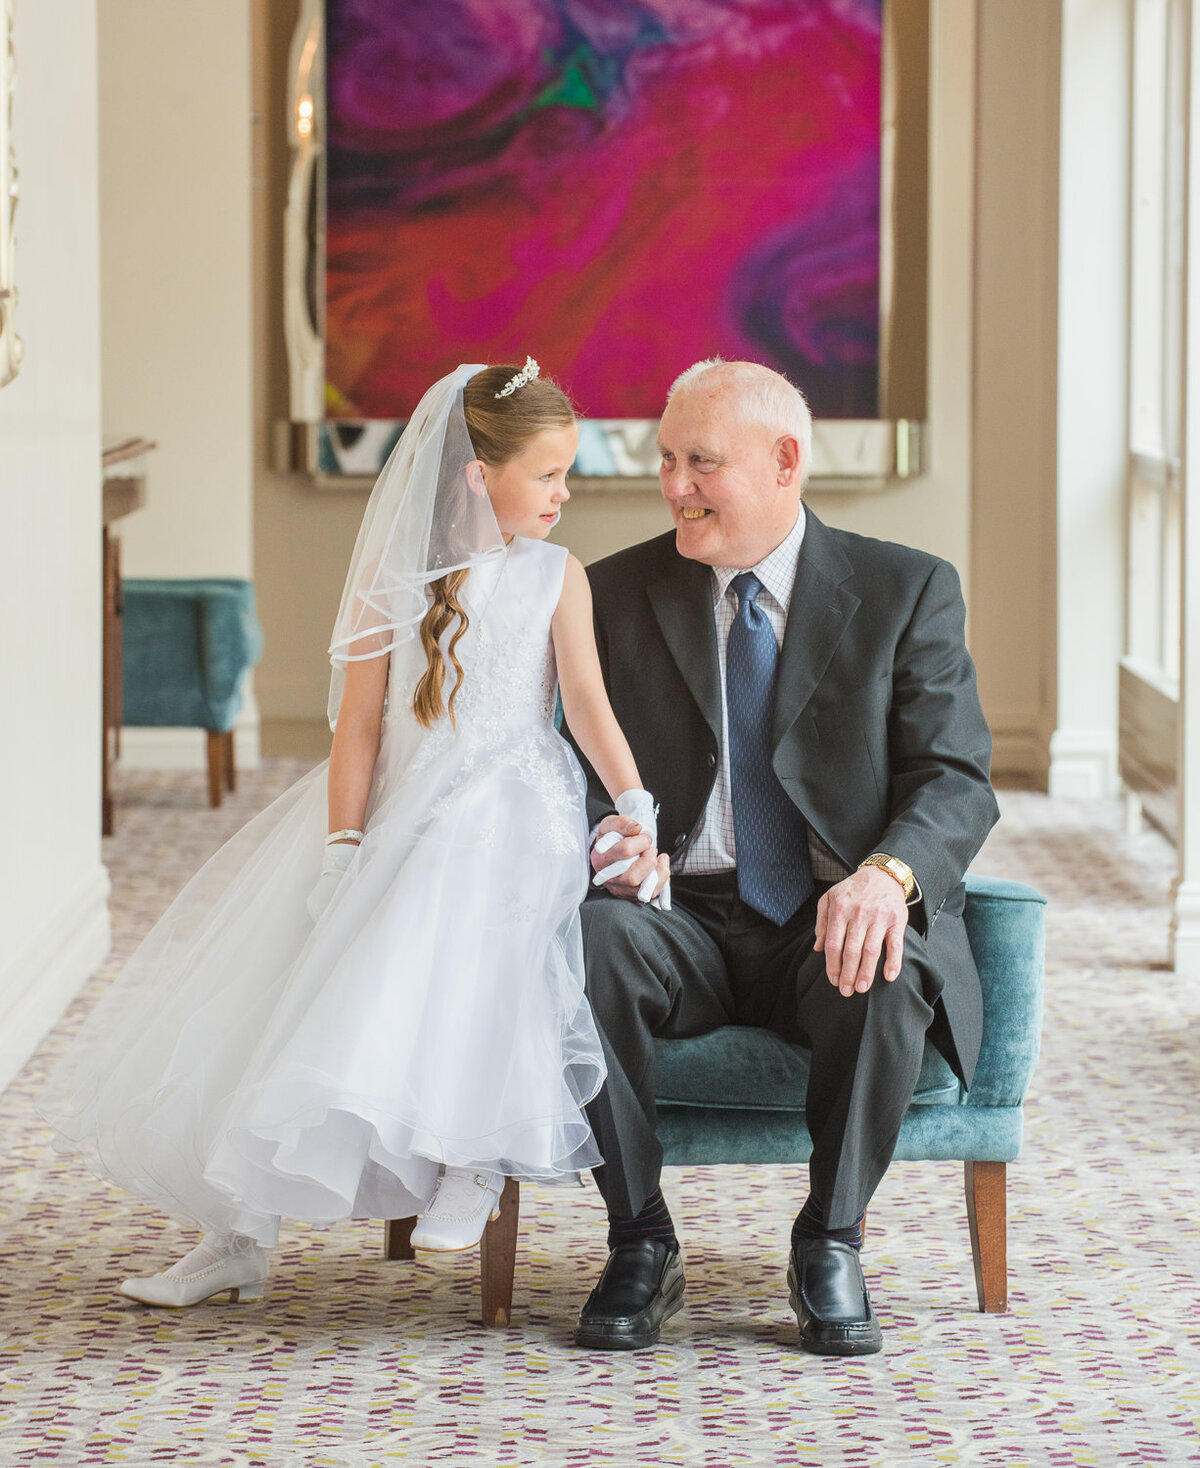 communion portrait of a grand daughter sitting  with her grandfather, looking at each other smiling